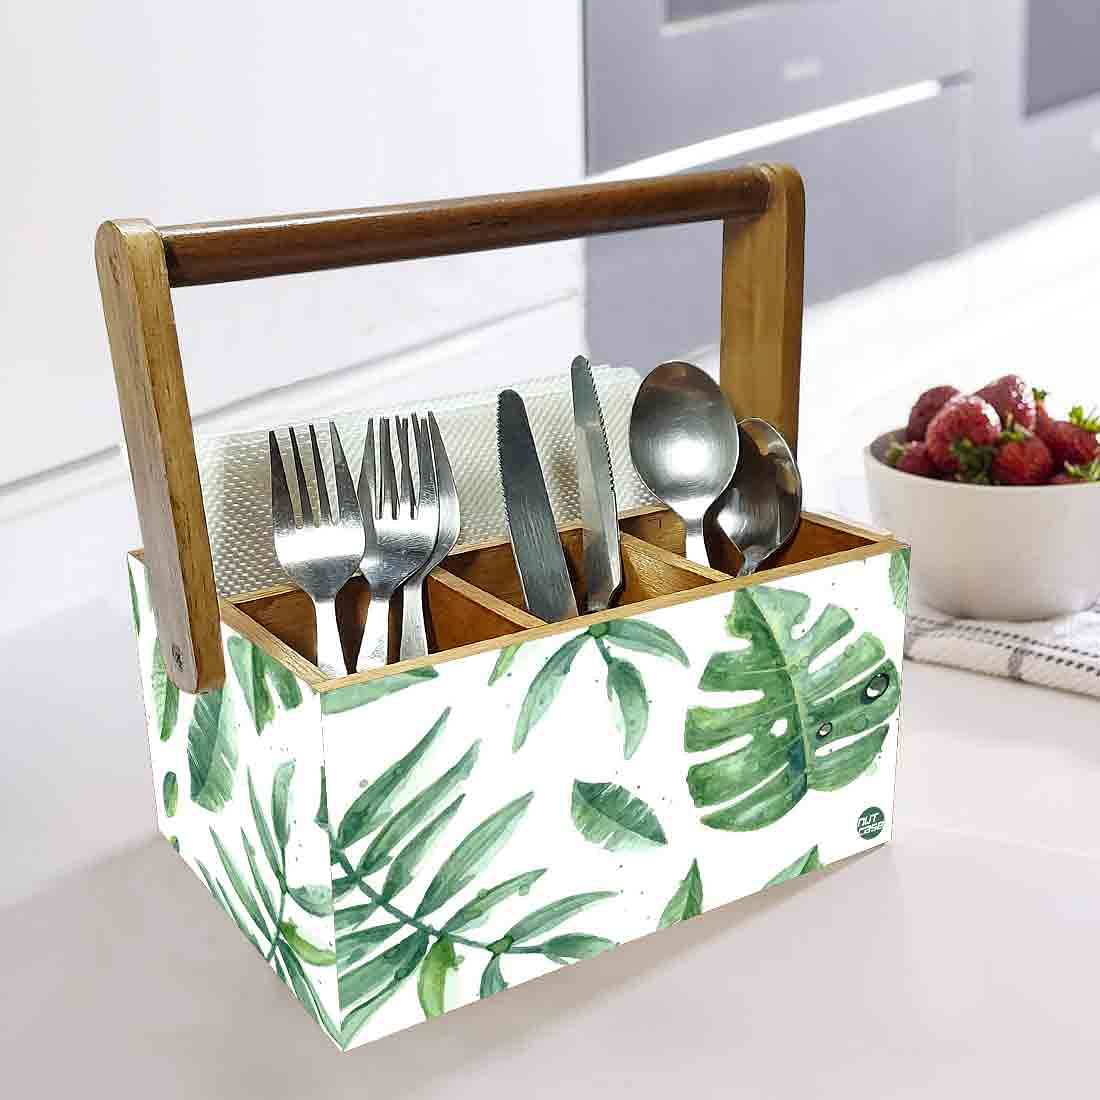 Cutlery Box for Storage Wooden Holder With Handle - Drops Leaves Nutcase